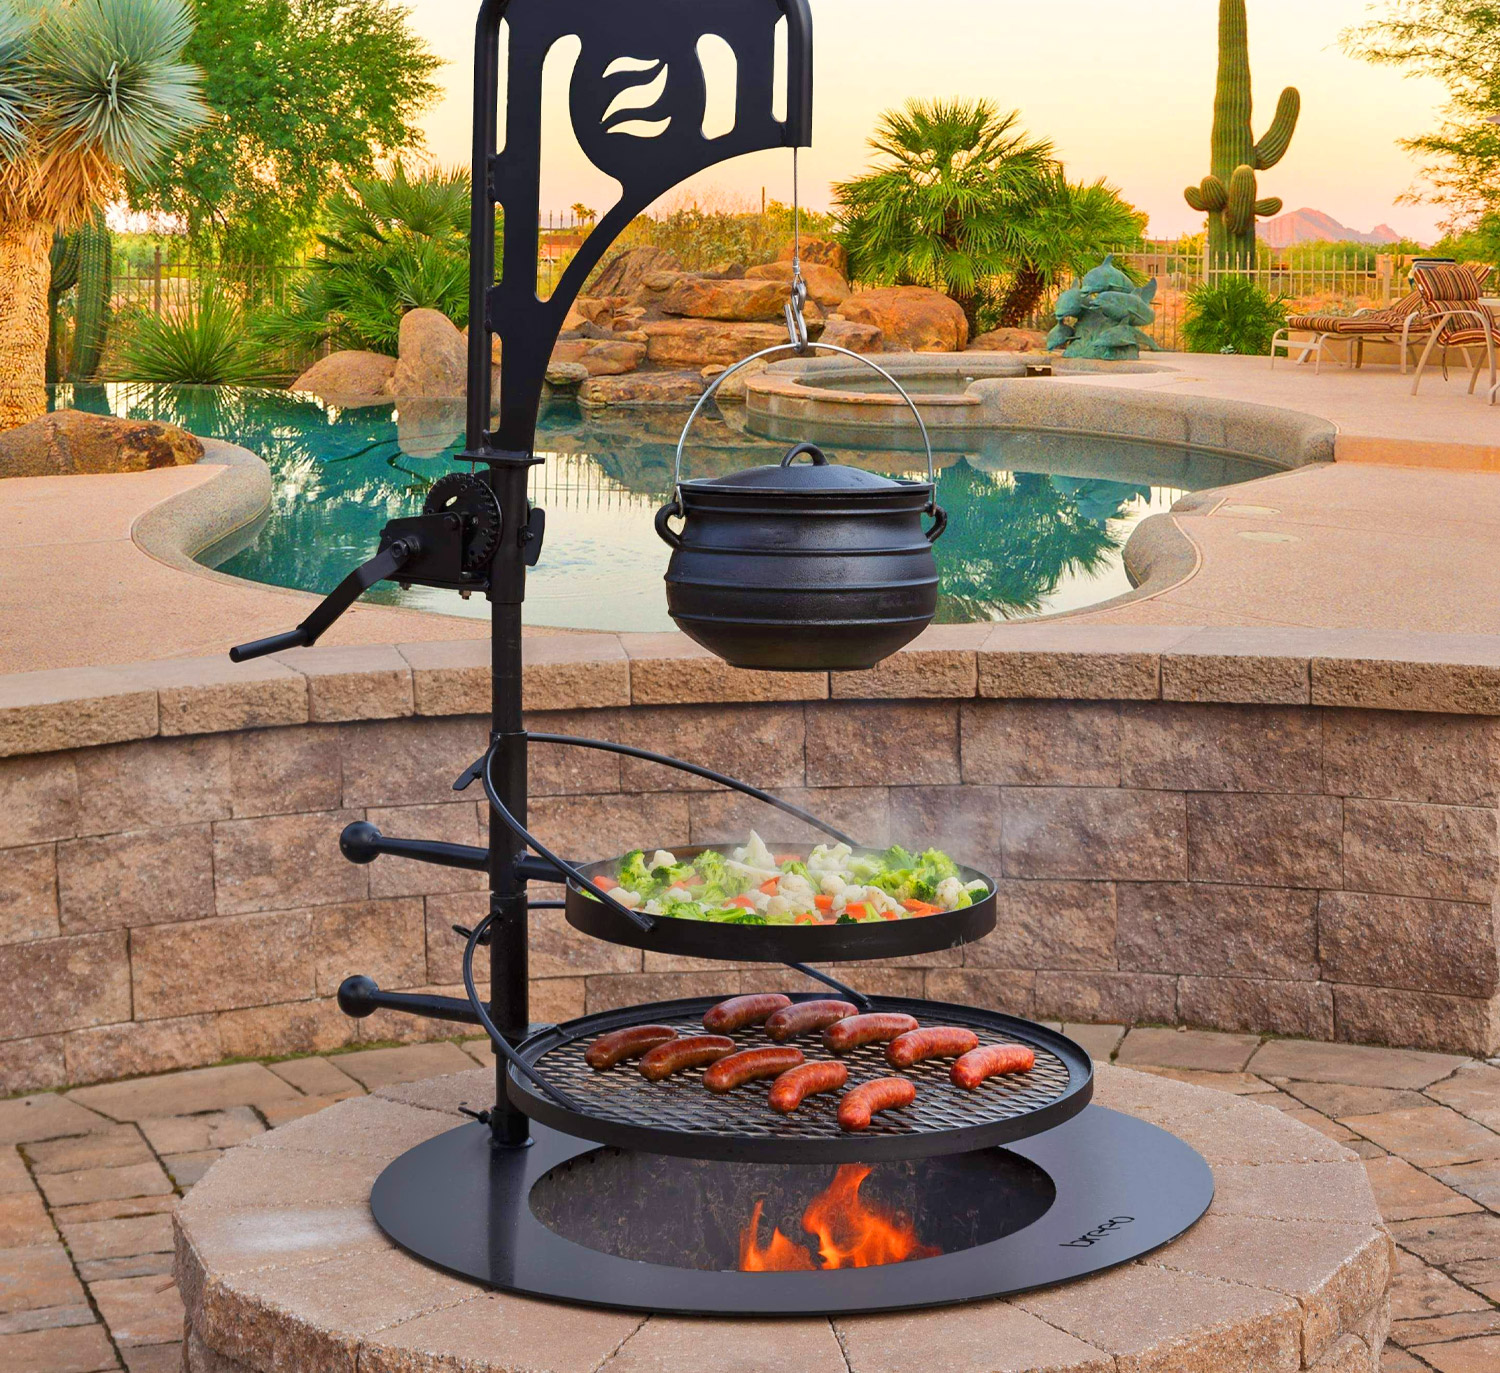 Fire Pit Into A Tiered Cooking Machine, Fire Pit Grill Kit